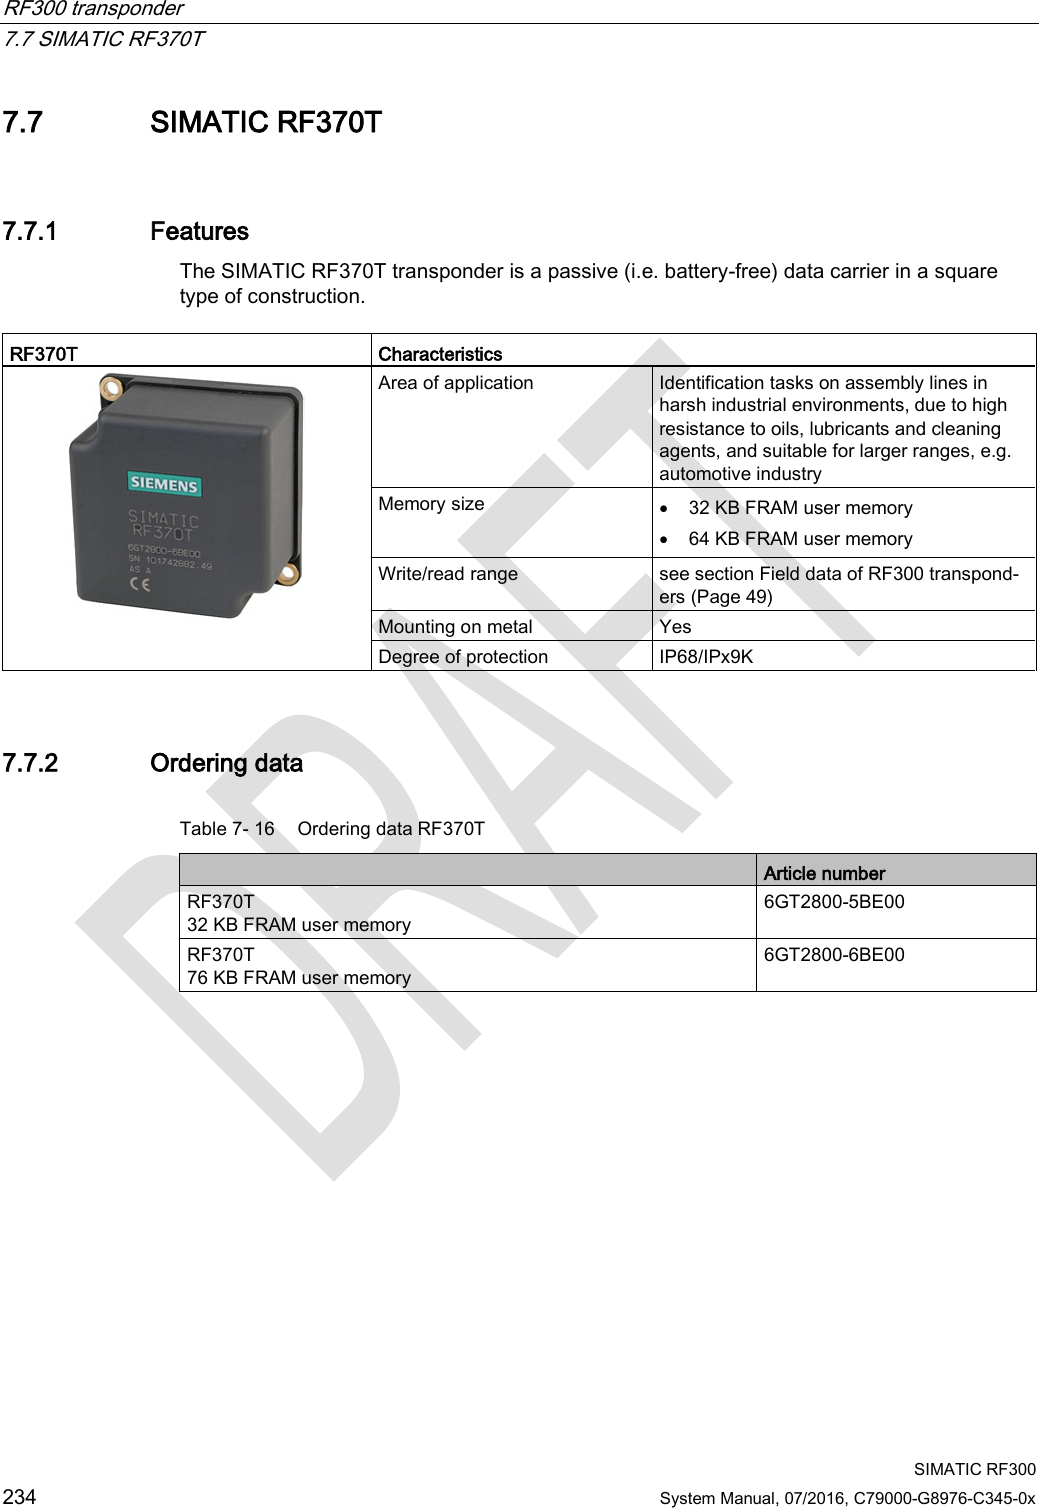 RF300 transponder   7.7 SIMATIC RF370T  SIMATIC RF300 234 System Manual, 07/2016, C79000-G8976-C345-0x 7.7 SIMATIC RF370T 7.7.1 Features The SIMATIC RF370T transponder is a passive (i.e. battery-free) data carrier in a square type of construction.   RF370T Characteristics    Area of application Identification tasks on assembly lines in harsh industrial environments, due to high resistance to oils, lubricants and cleaning agents, and suitable for larger ranges, e.g. automotive industry Memory size • 32 KB FRAM user memory • 64 KB FRAM user memory Write/read range see section Field data of RF300 transpond-ers (Page 49)  Mounting on metal Yes Degree of protection IP68/IPx9K 7.7.2 Ordering data Table 7- 16 Ordering data RF370T  Article number RF370T  32 KB FRAM user memory 6GT2800-5BE00 RF370T  76 KB FRAM user memory 6GT2800-6BE00 